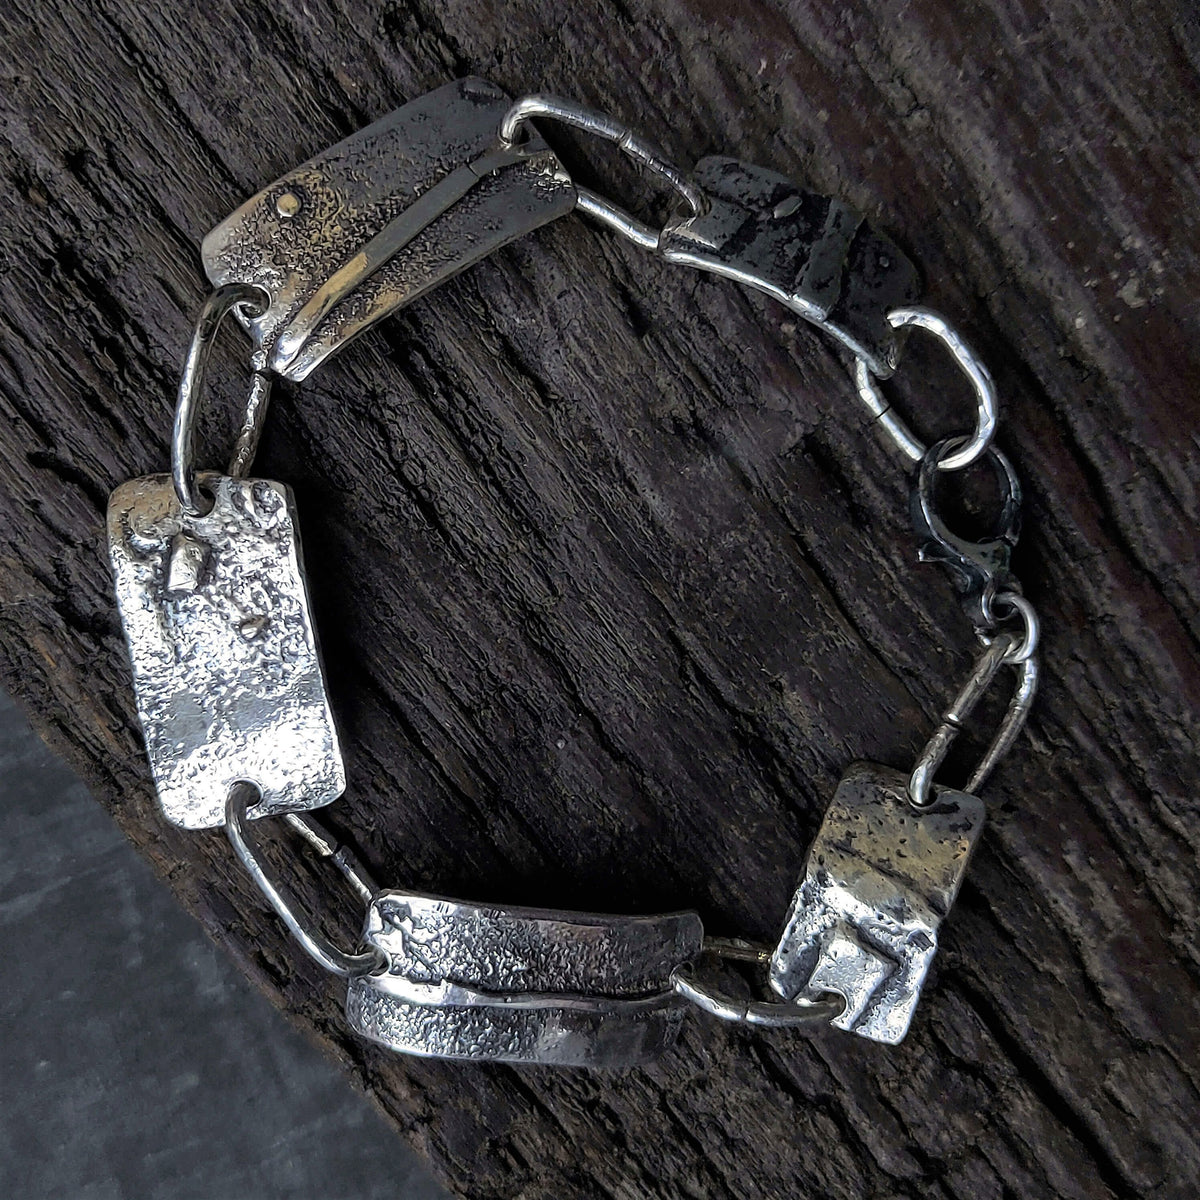 reticulated silver bracelet, unisex, hammered silver links, oxidized, handmade by roffjewellery.com